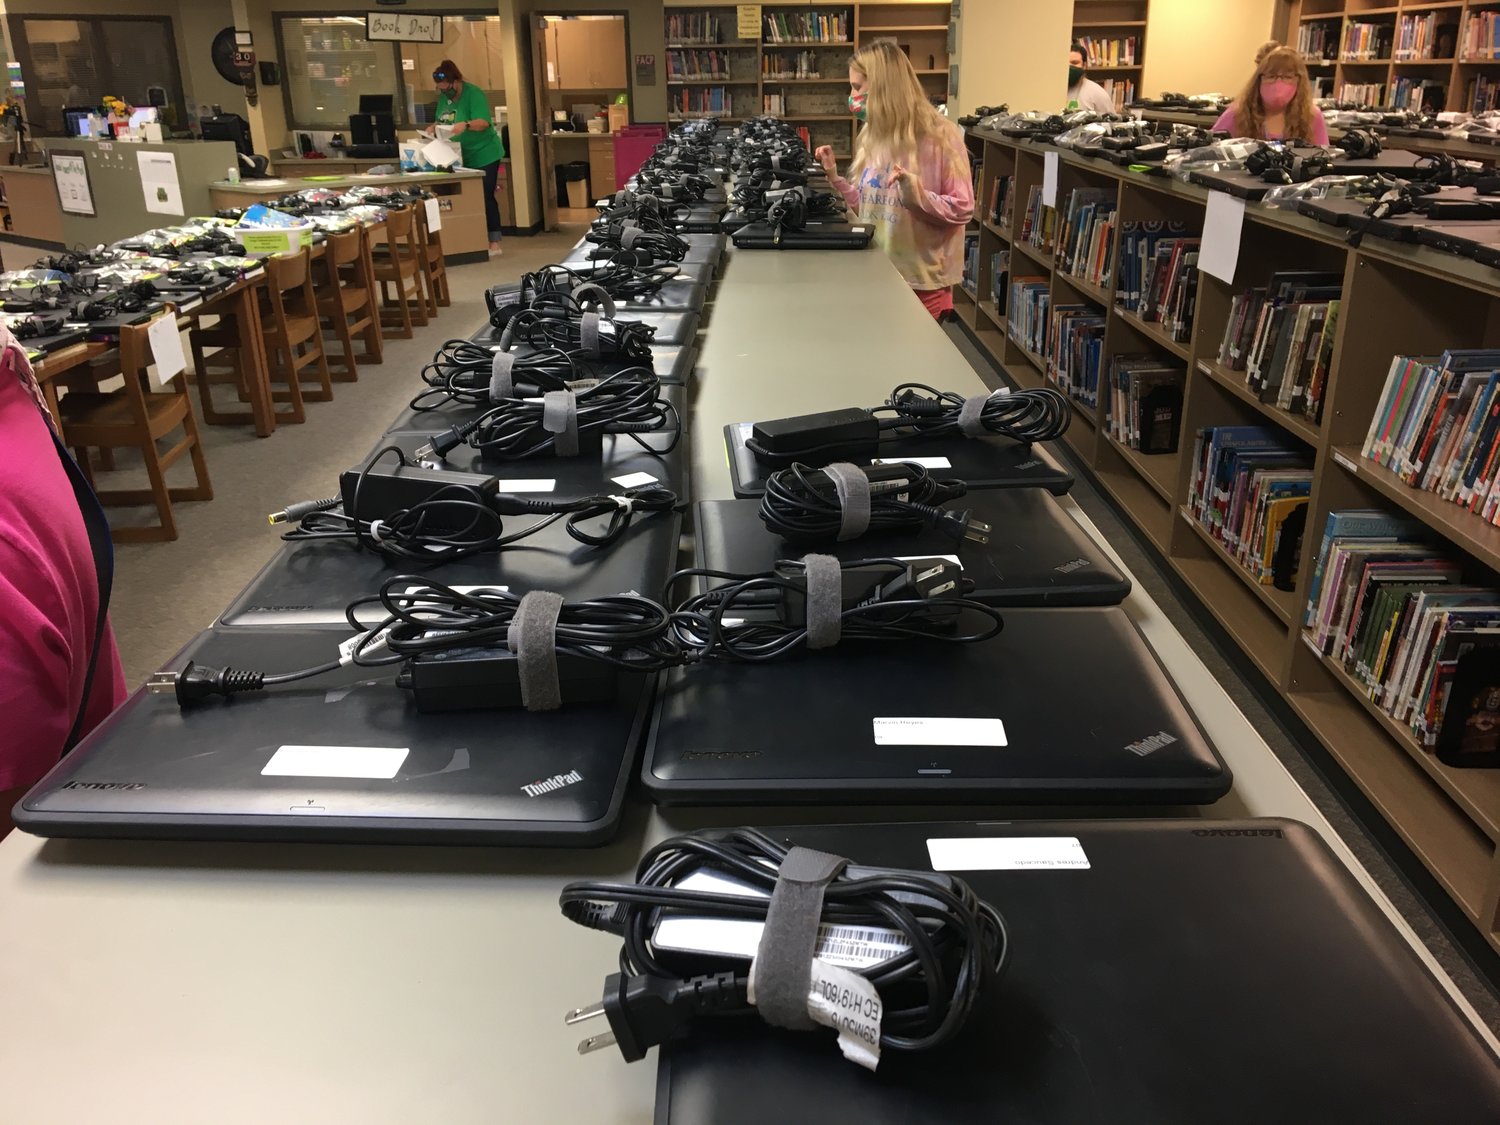 Chromebooks set aside to be distributed to parents. Over 35,000 devices were lent to parents in the device pickups according to Katy ISD staff.